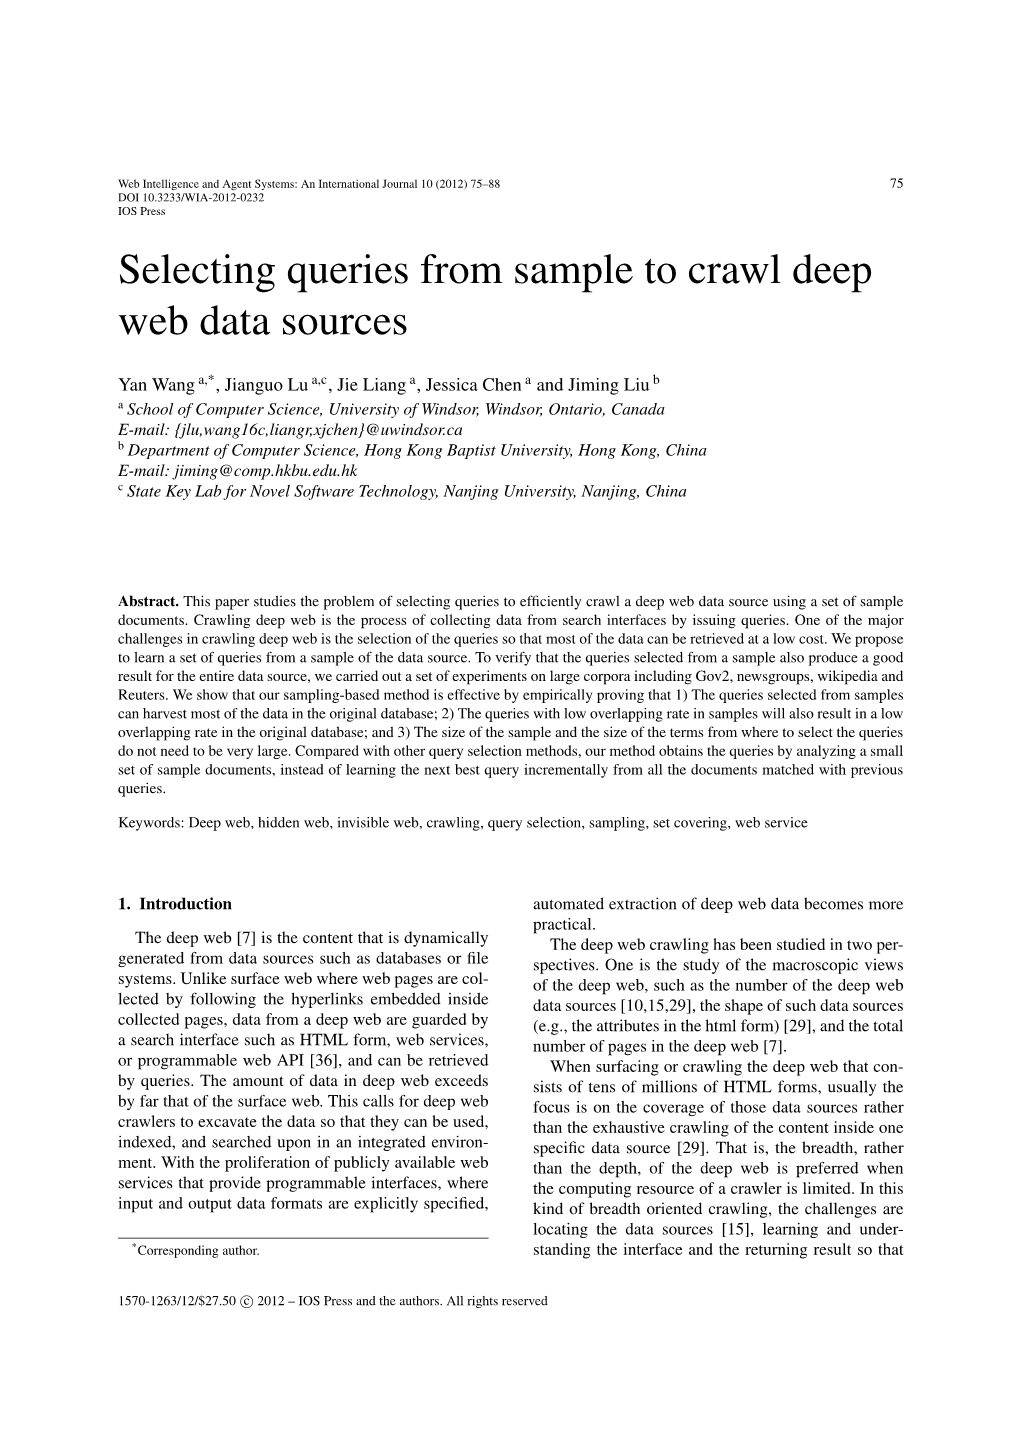 Selecting Queries from Sample to Crawl Deep Web Data Sources [PDF]